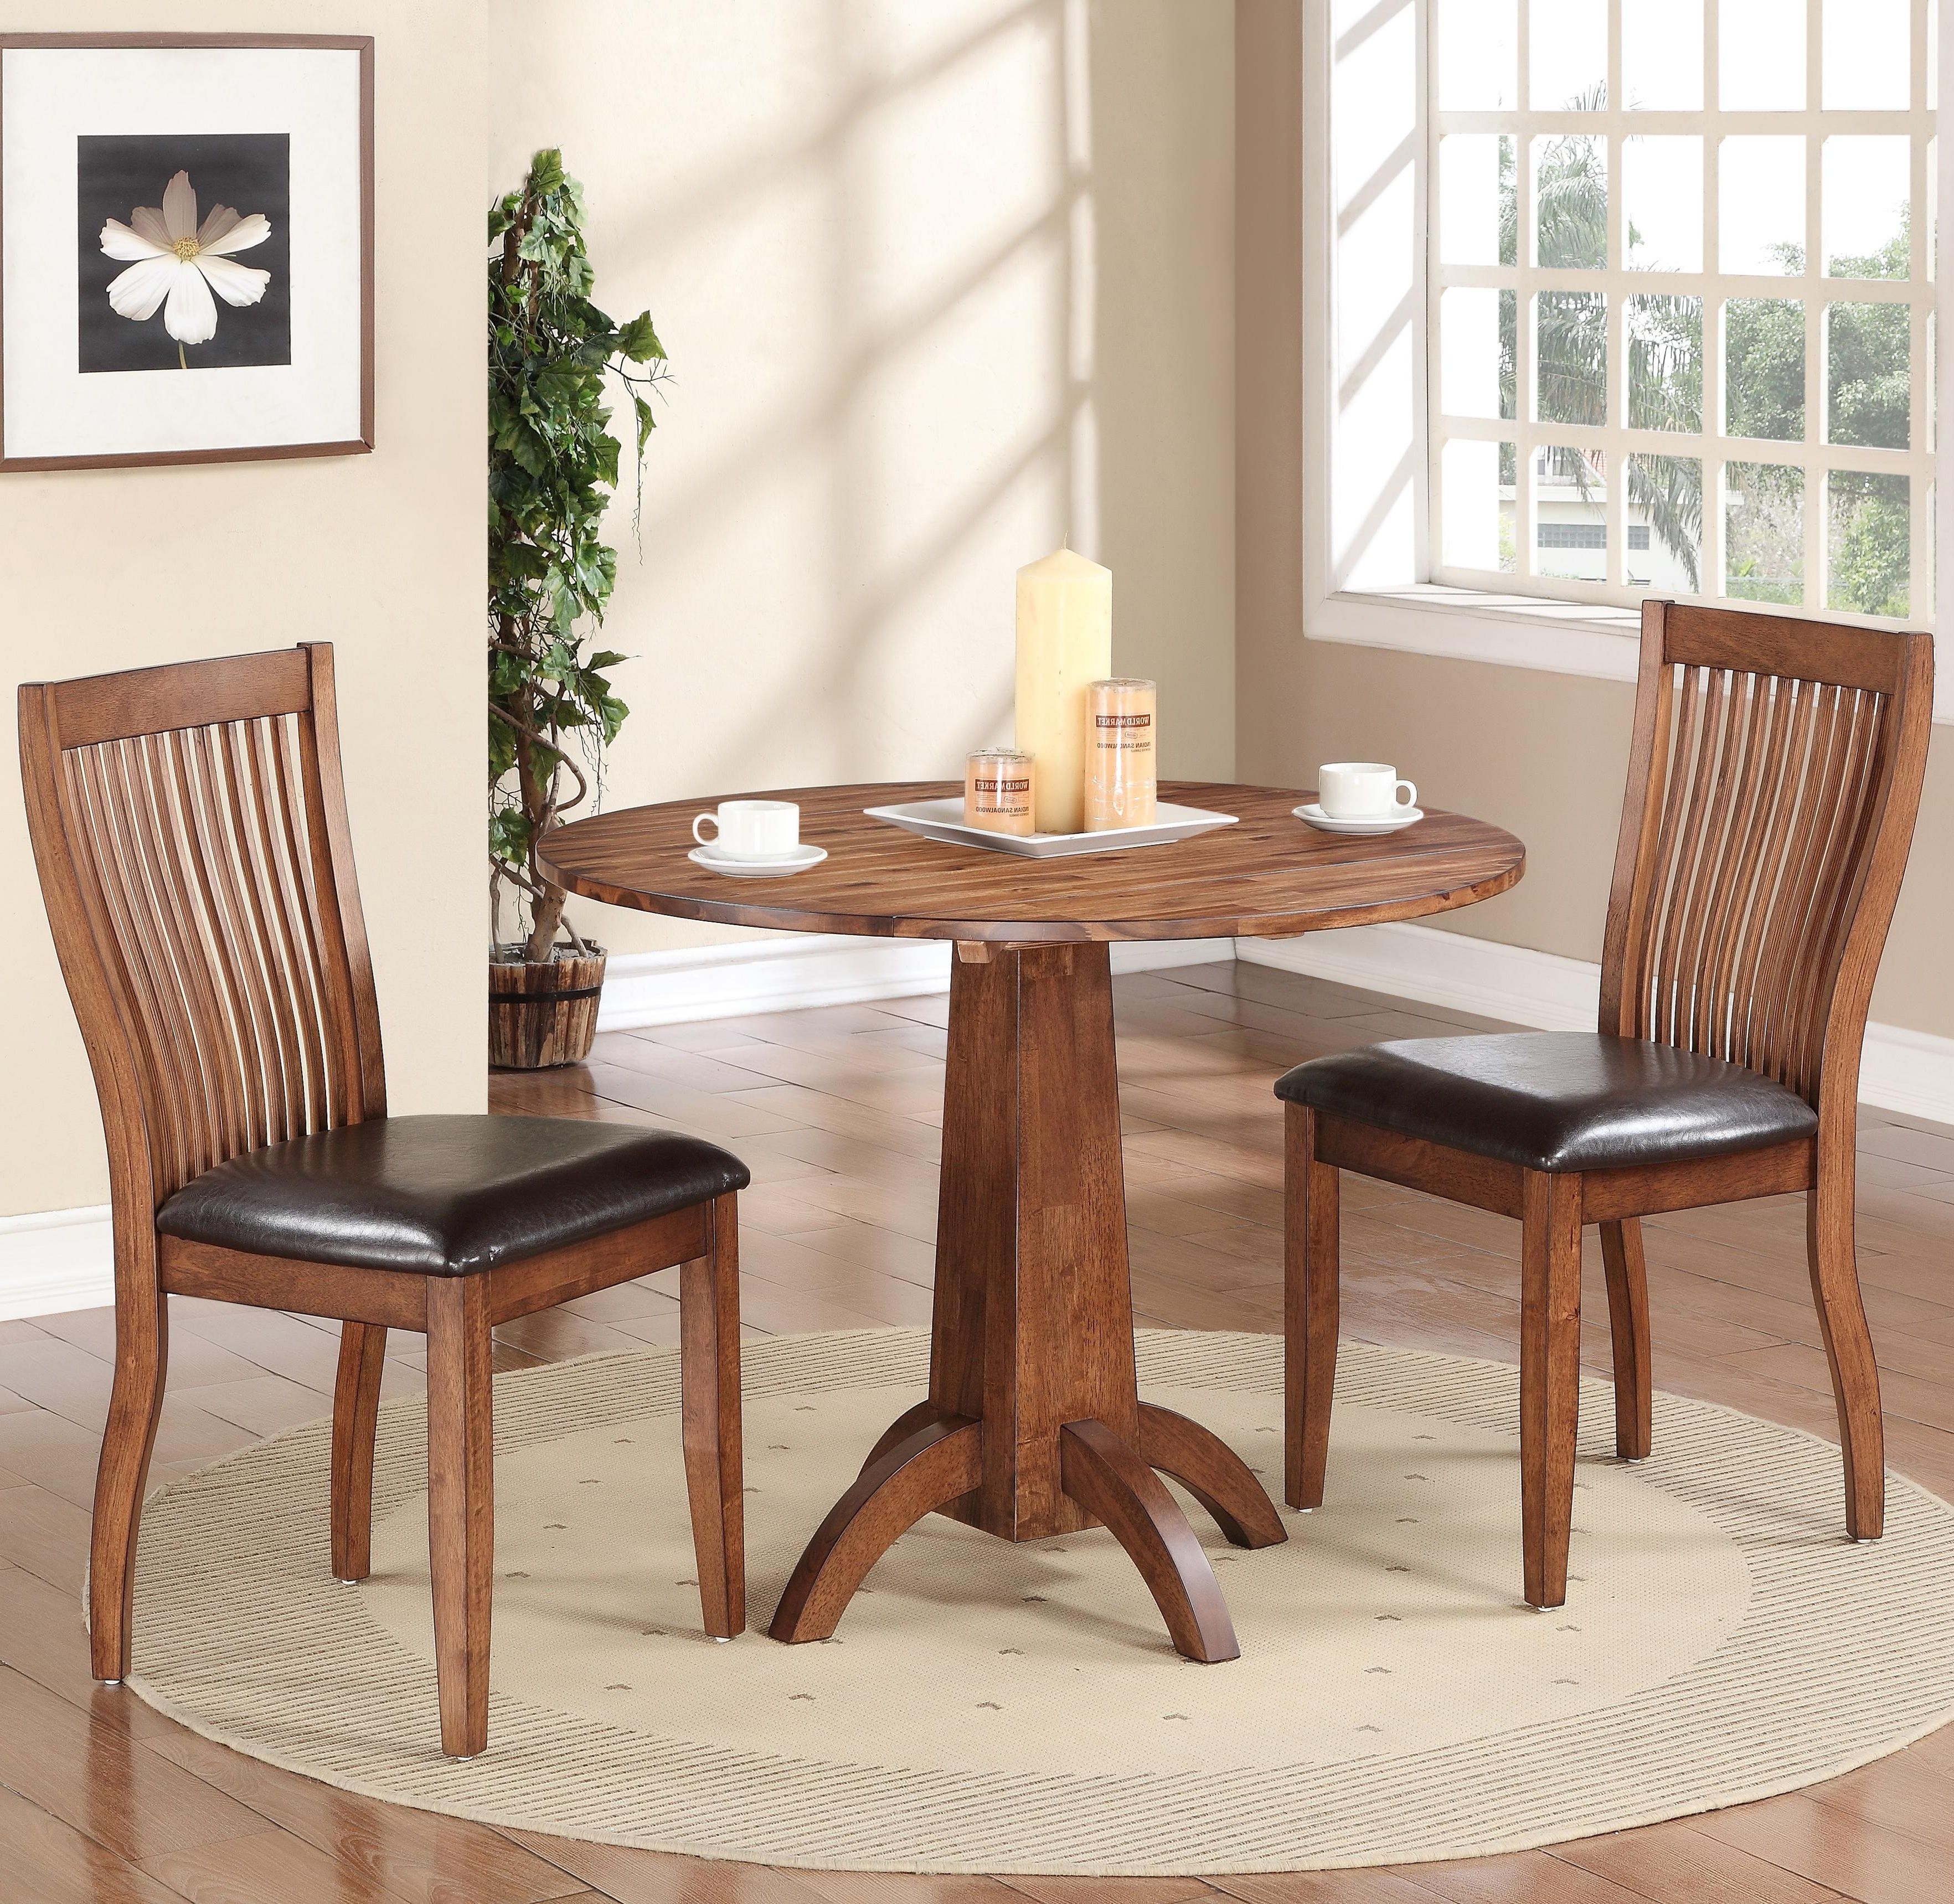 Widely Used 3 Piece Dining Sets Inside Winners Only Broadway 3 Piece Dining Set With Slat Back Chairs (View 12 of 25)